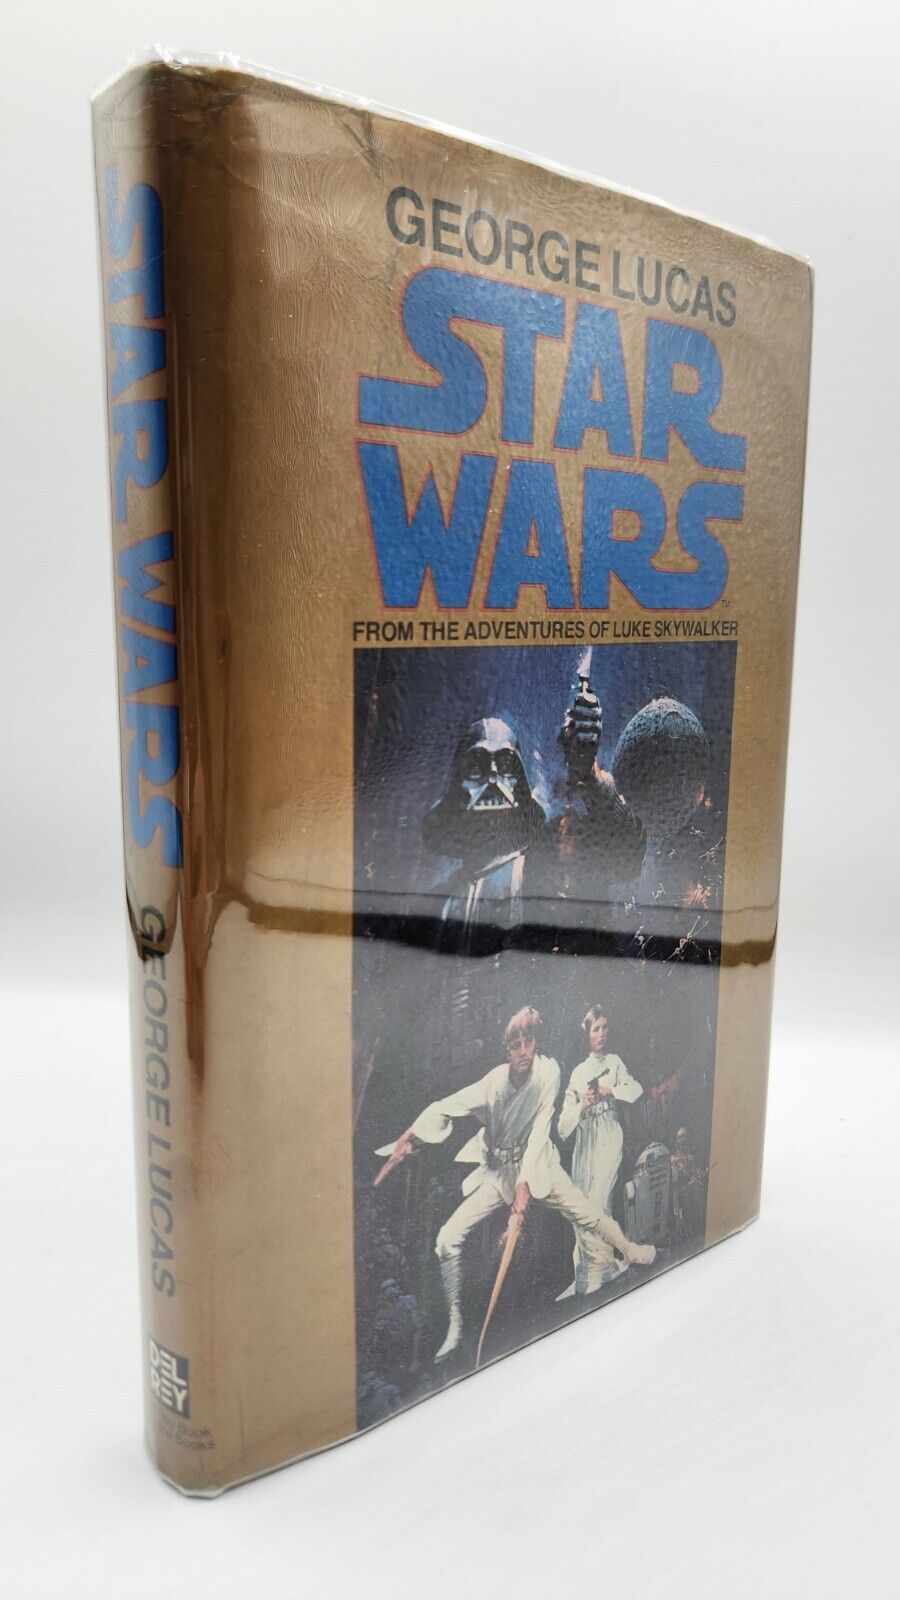 George Lucas Star Wars From the Adventures of Luke Skywalker 1st Edition 1977